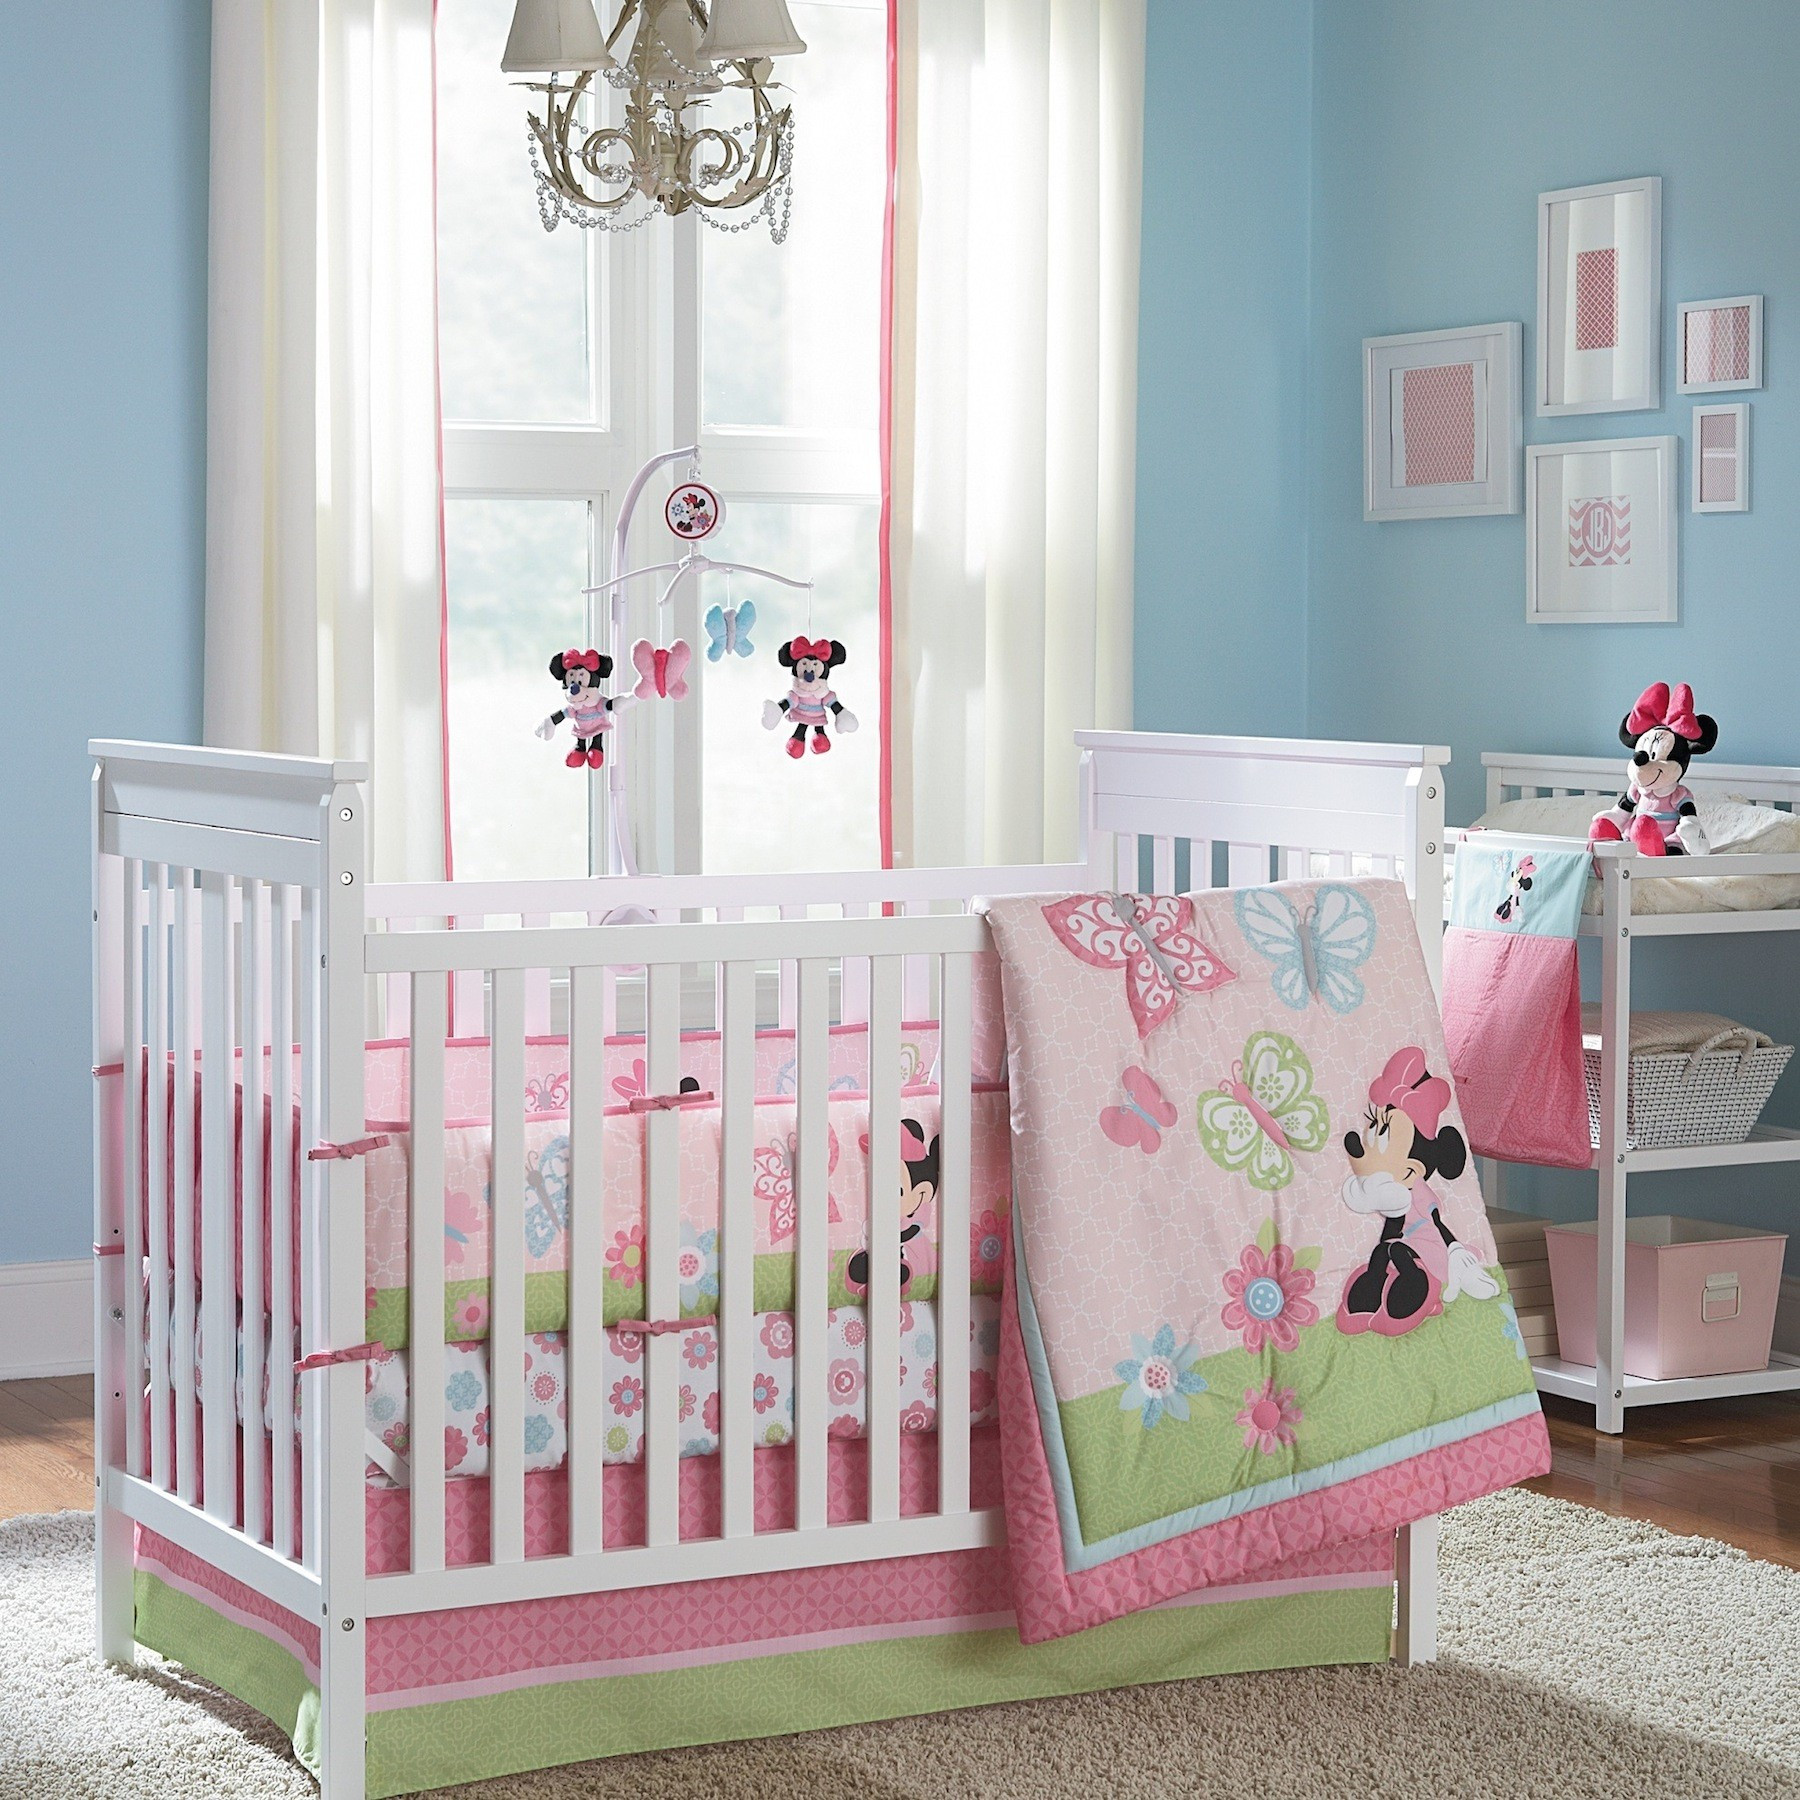 Minnie Mouse Baby Room Decor
 10 Attractive Minnie Mouse Baby Bedroom Ideas Mosca Homes